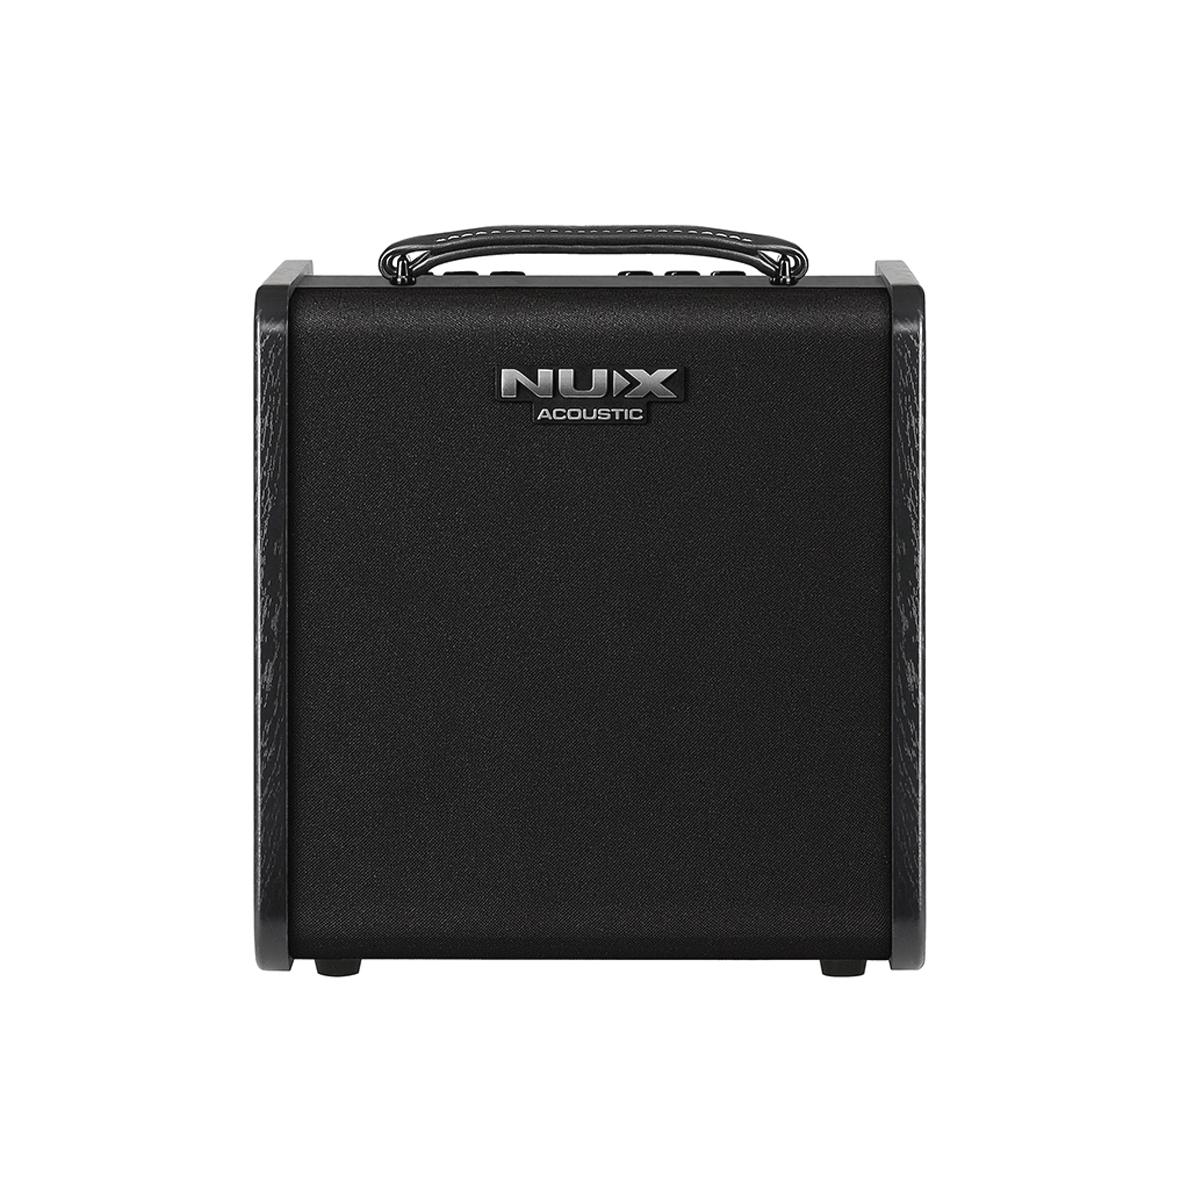 NUX Home Page NUX AC60 ACOUSTIC AMP - Byron Music